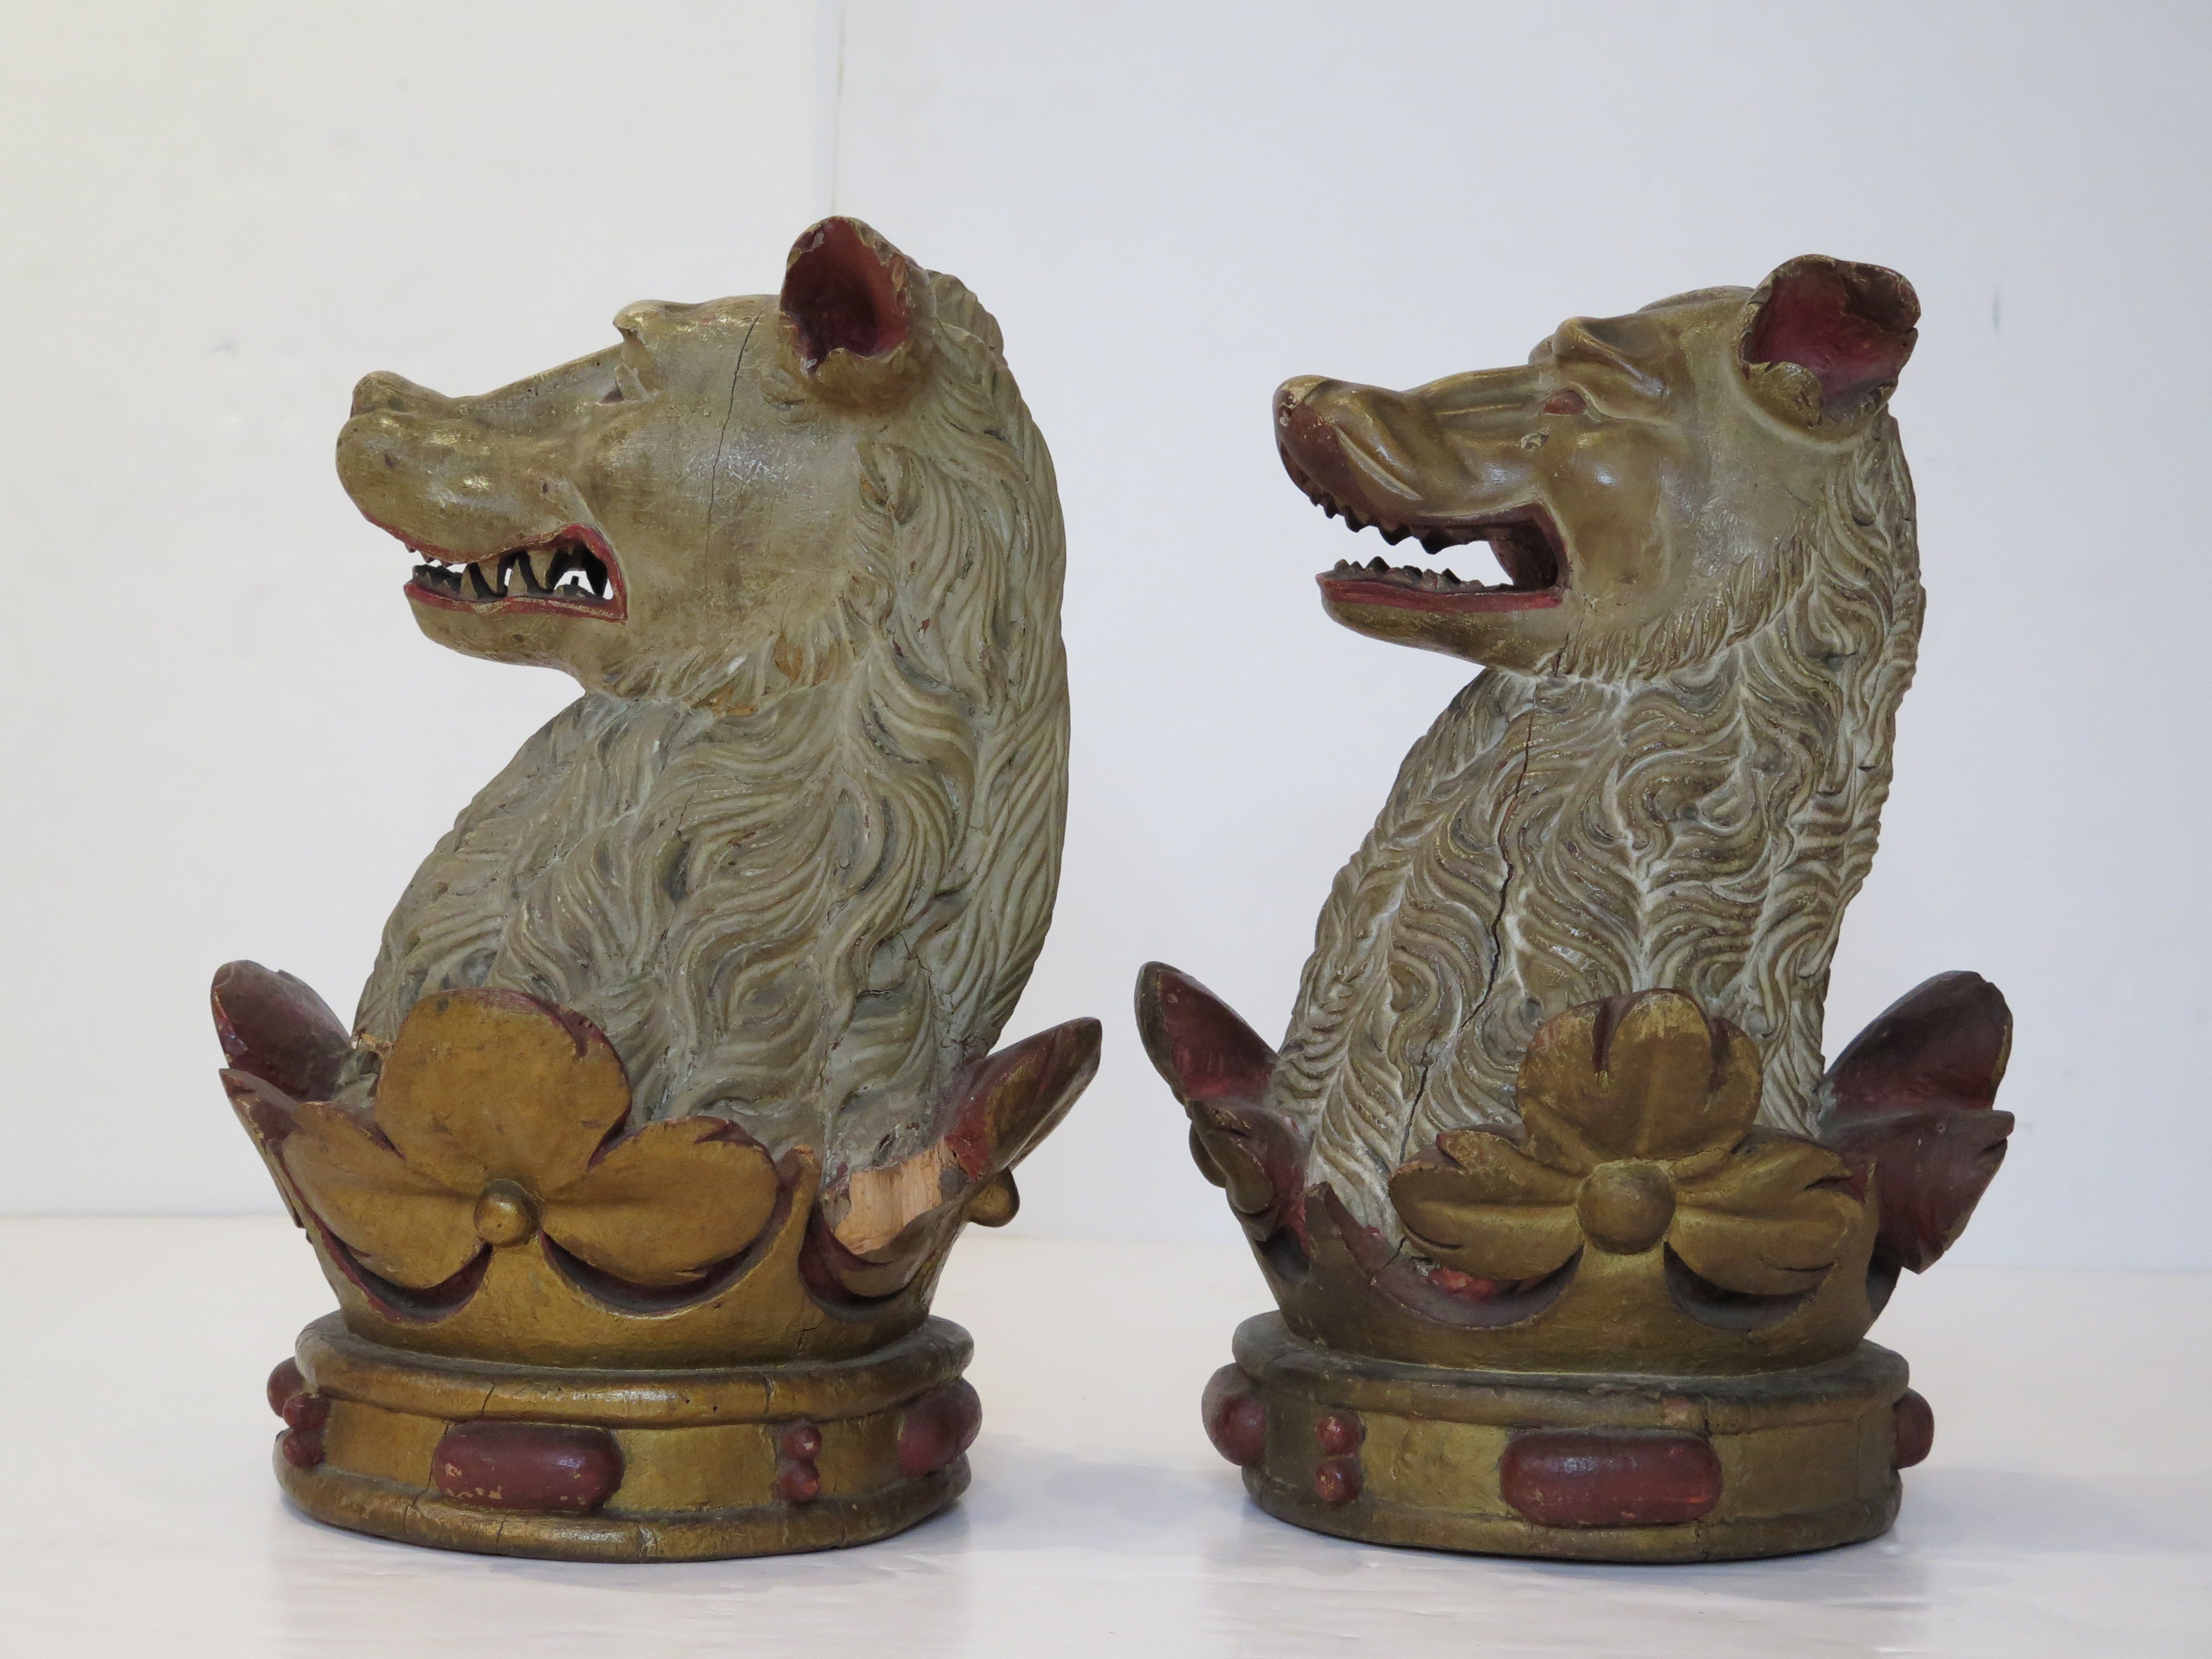 Carved Wood Armorial Crests / Bears or Wolves